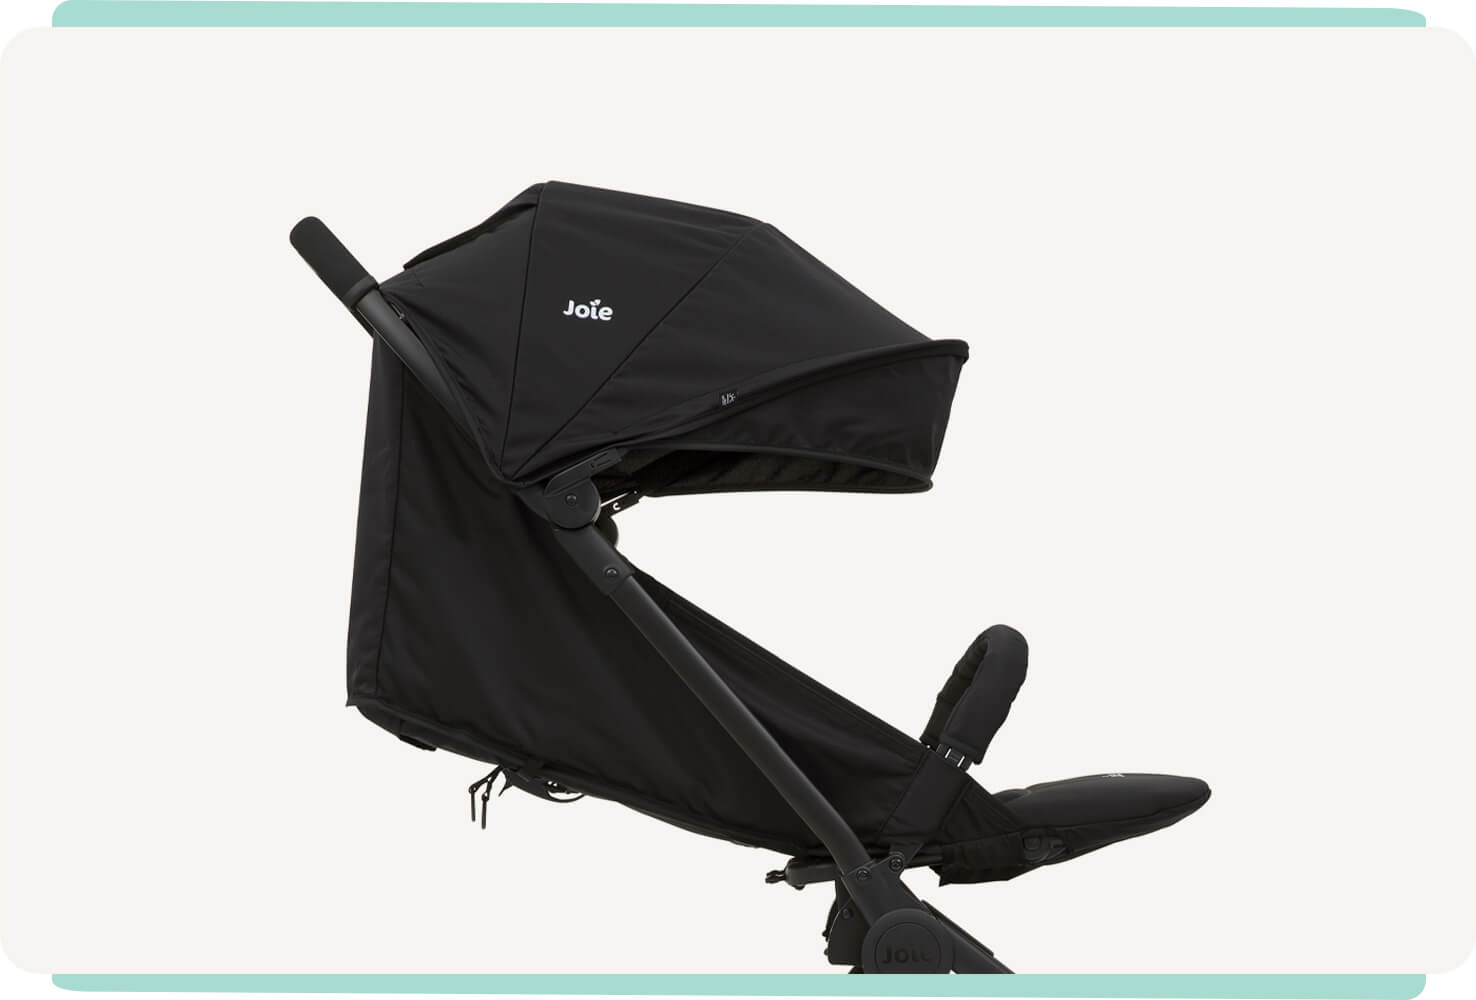  Joie pact travel system has a deep recline 